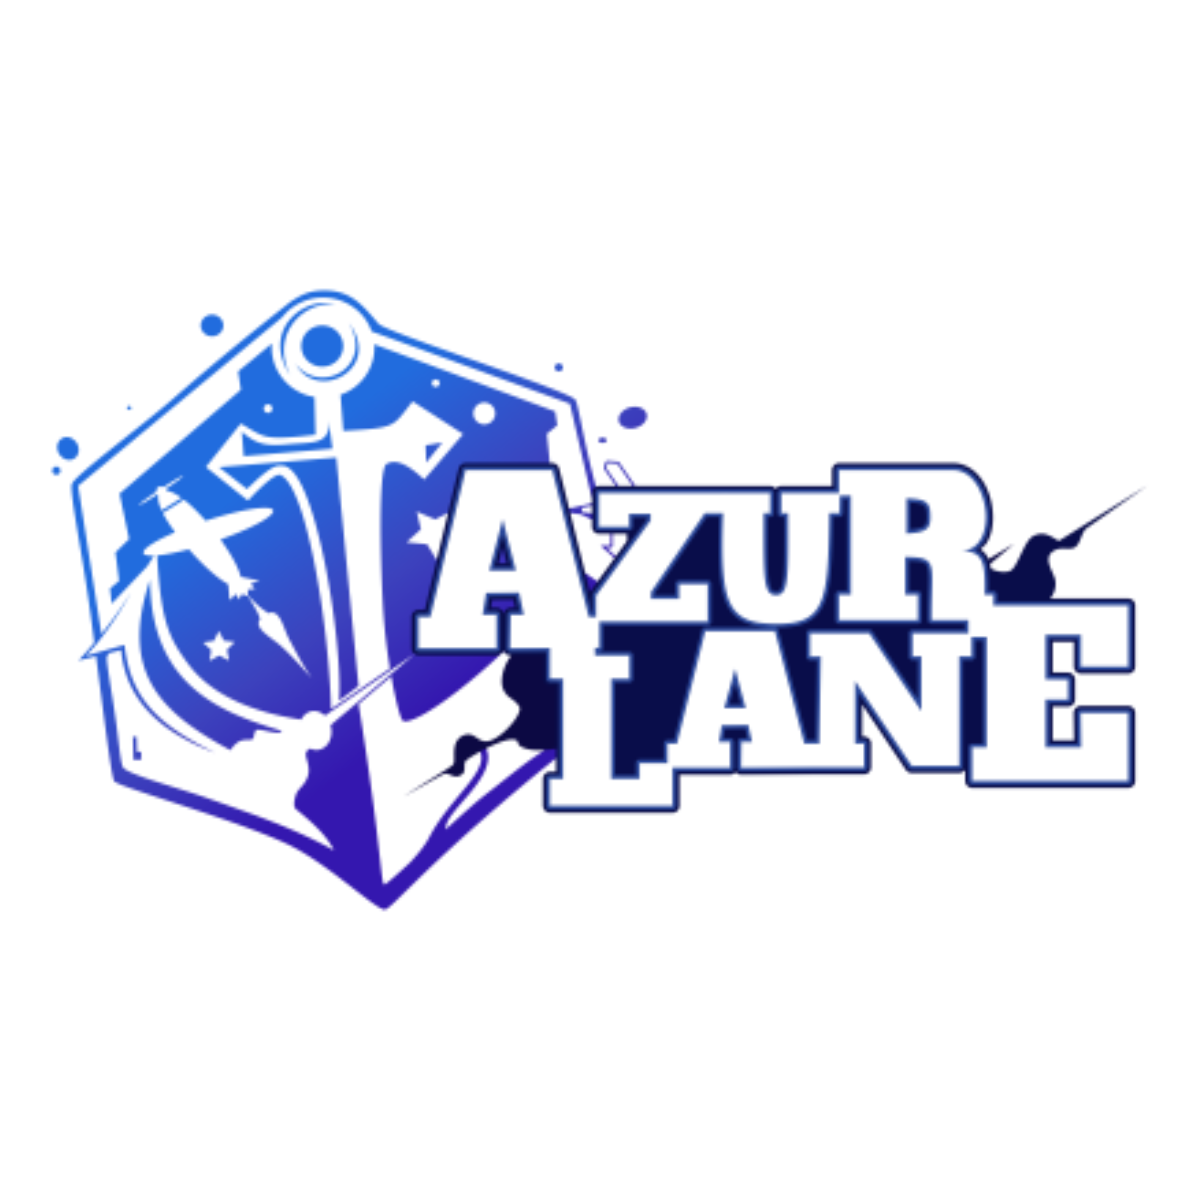 Bushiroad Sleeve Collection -Azul Lane- &quot;Bache-Brilliant Speedster Ver.&quot; (Vol.4084)-Bushiroad-Ace Cards &amp; Collectibles